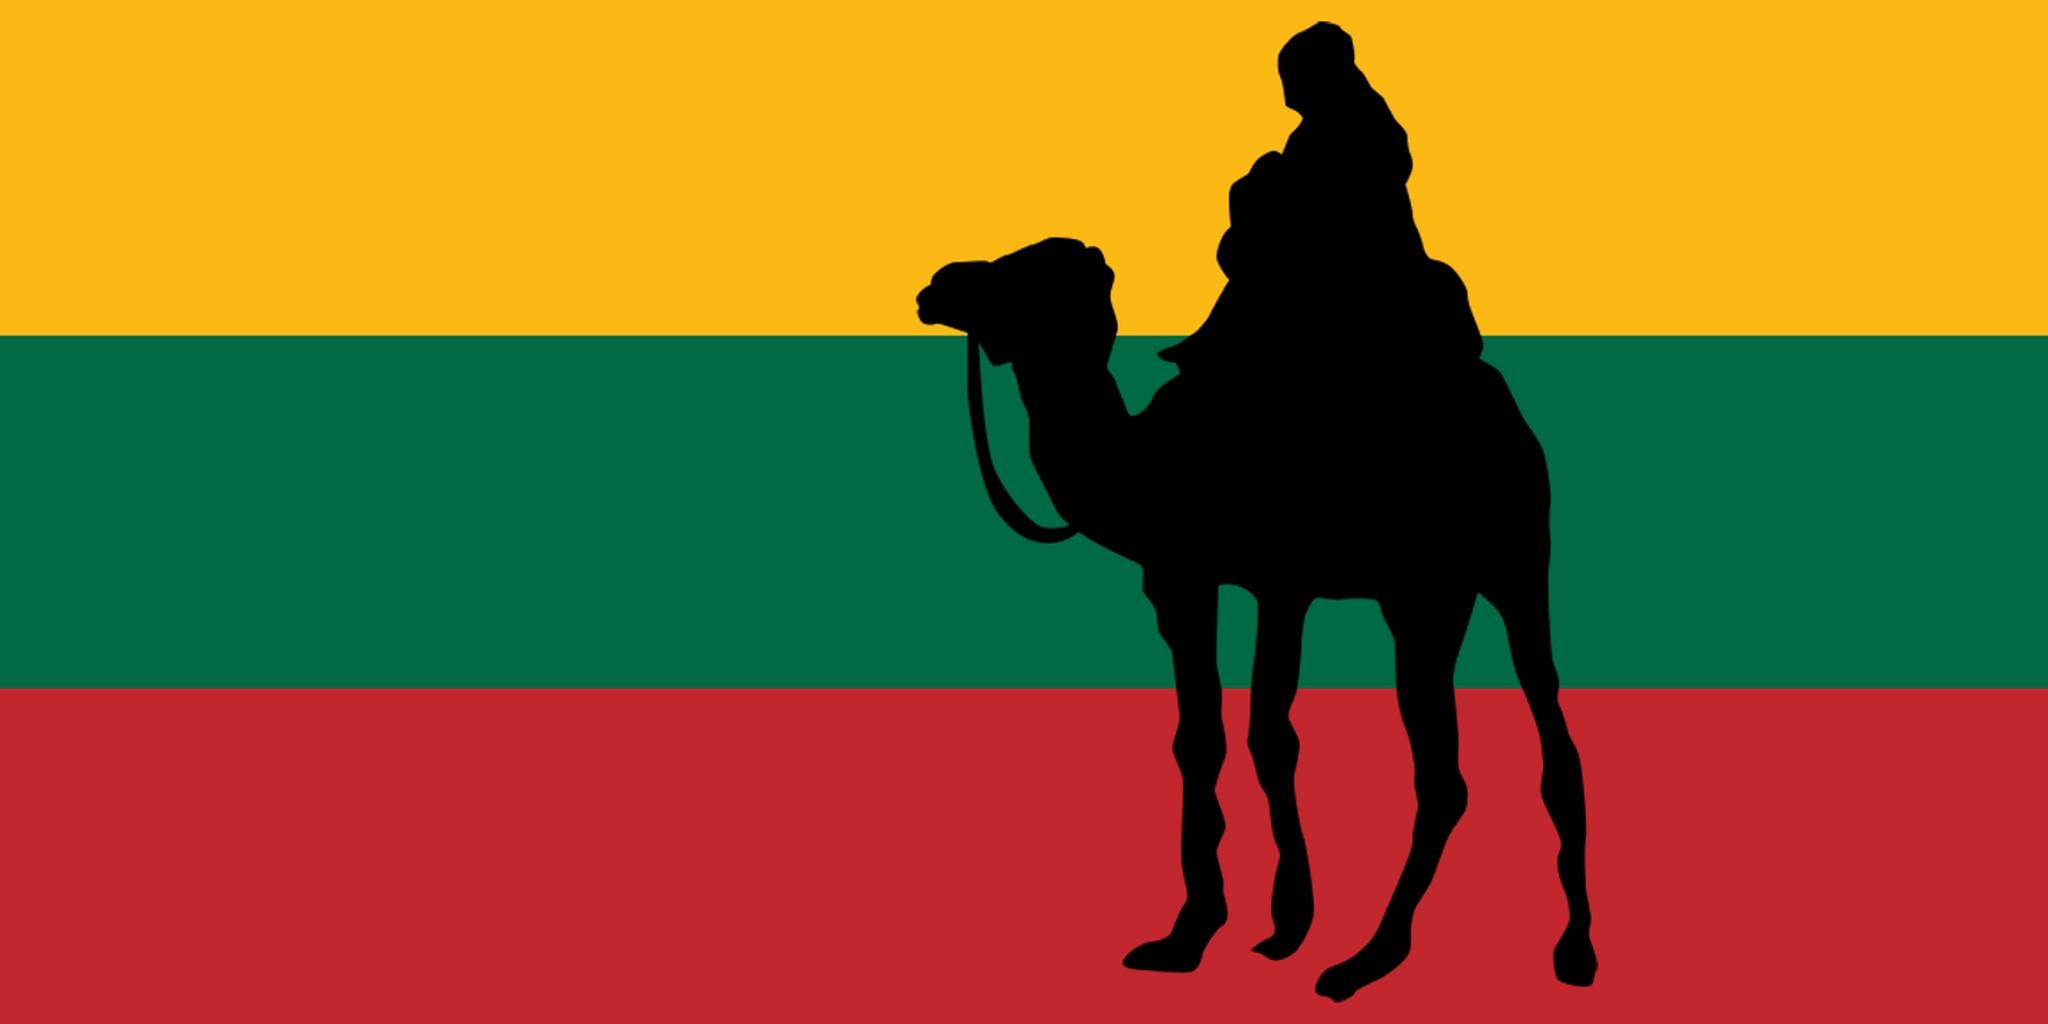 Silkroad Logo - Silk Road 2.0's servers were in Lithuania. The Daily Dot